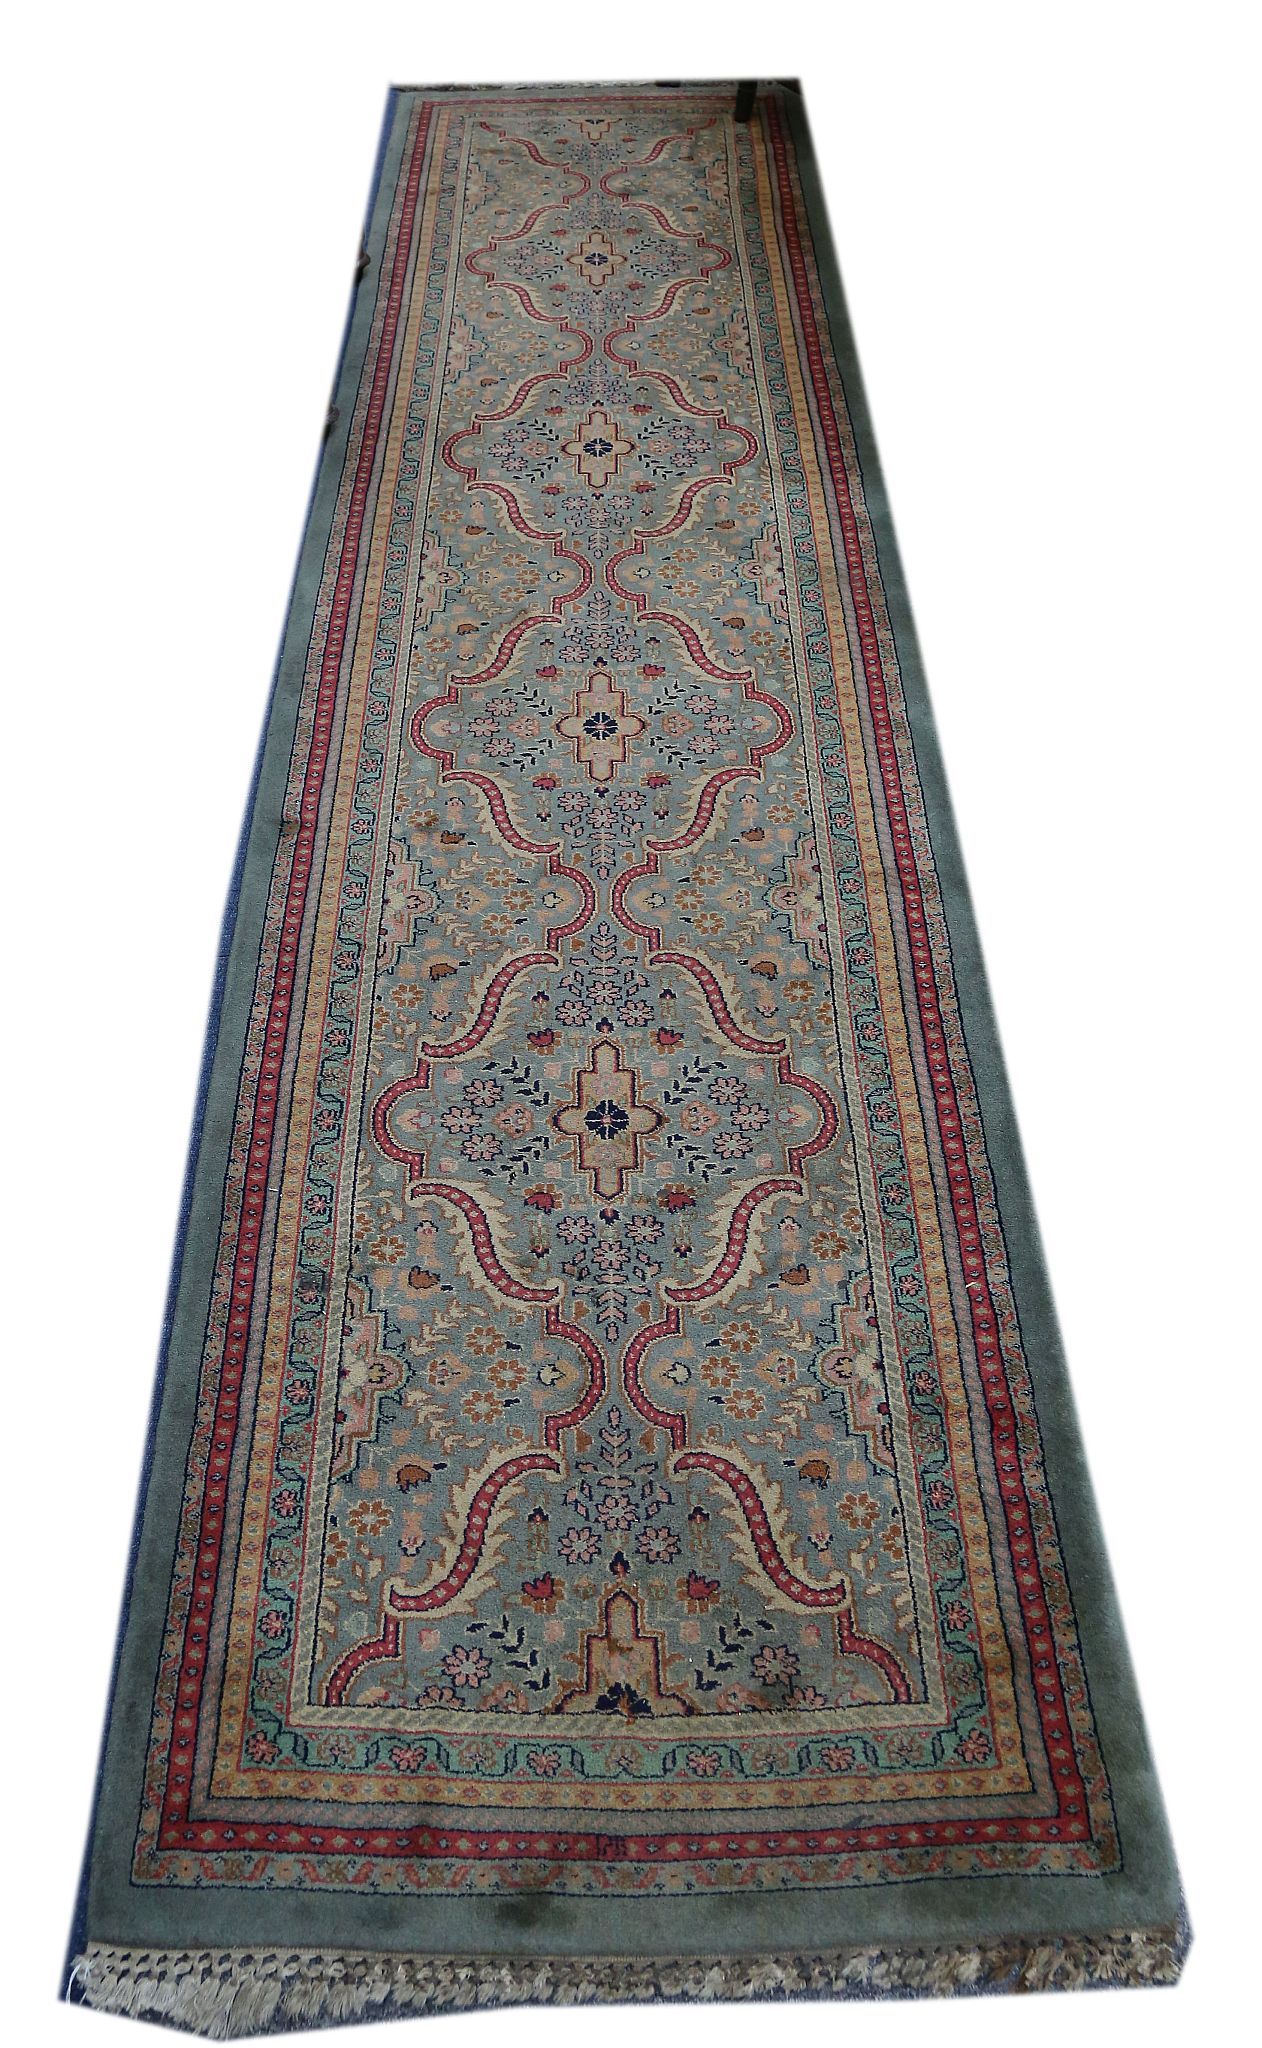 Two carpets; an Indian silk carpet with Herati design on ivory ground, 8'10" x 6'2", 267 x 187cm,